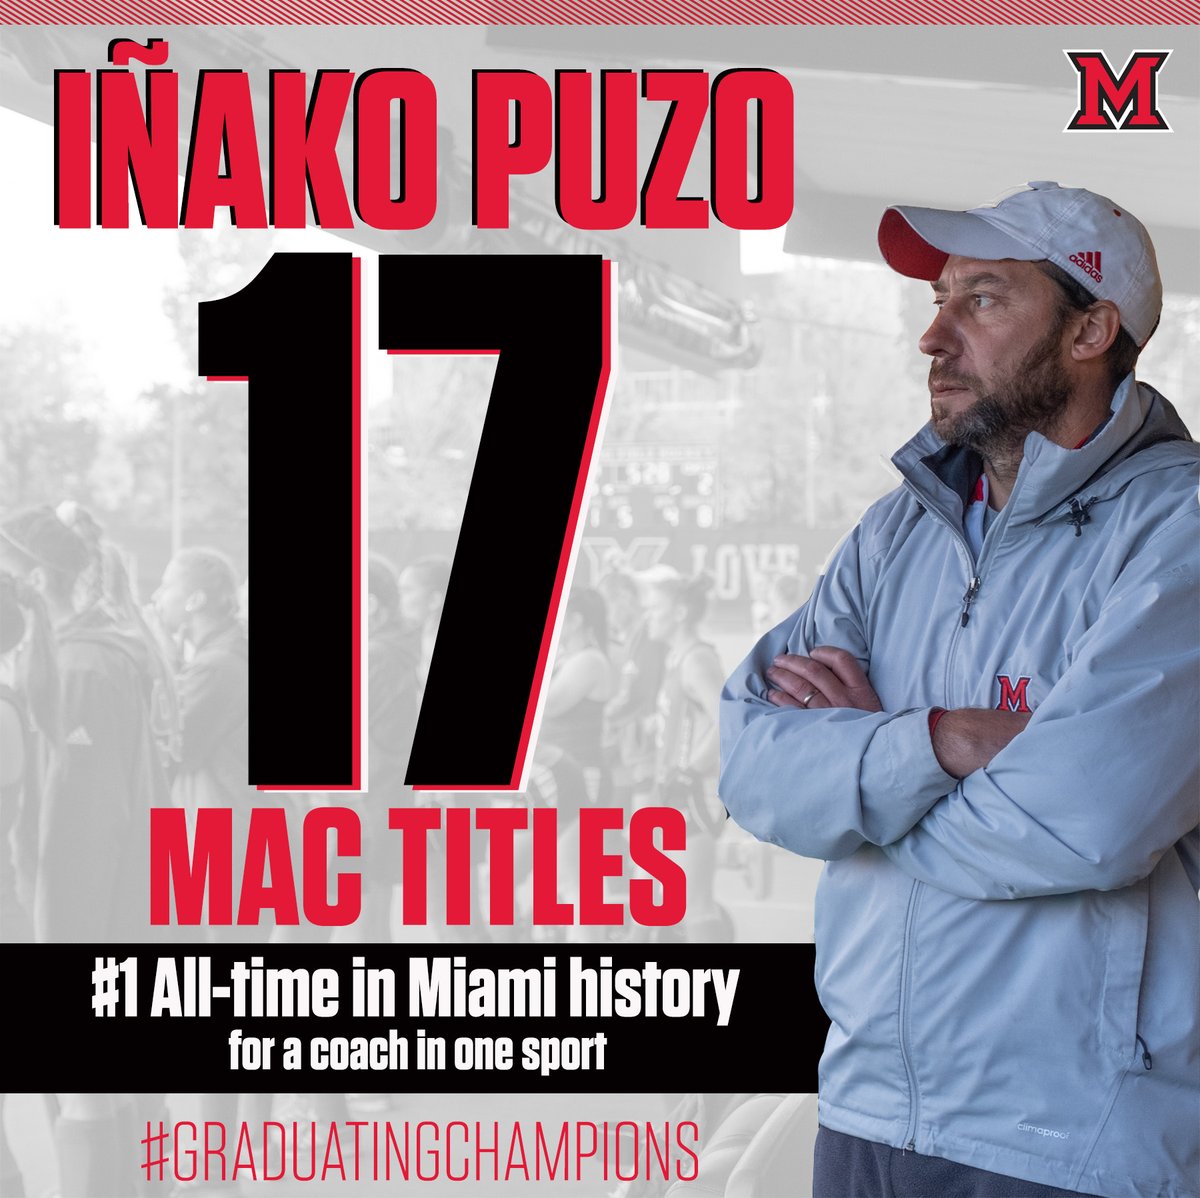 With today’s victory, Iñako Puzo set his 4th MAC record with his 12th consecutive MAC post-season win. He also extended his consecutive MAC FH titles streak (13) & consecutive MAC FH Tournaments won (6). He’s already won the most NCAA tournament games (4) in MAC FH history.